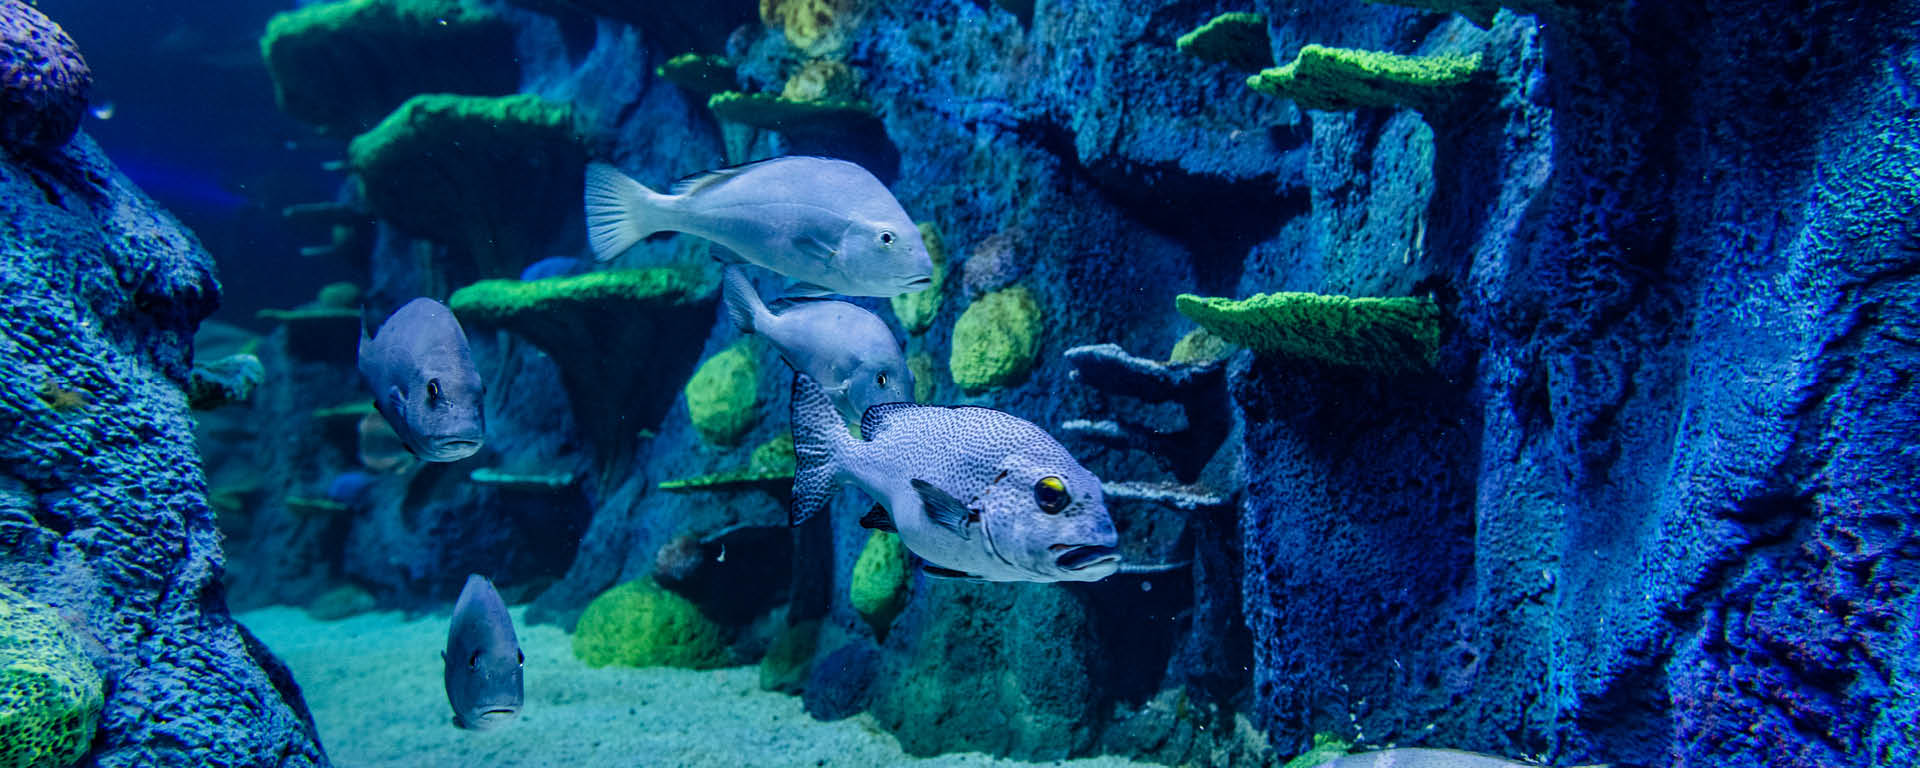 Reef Fish In Day And Night